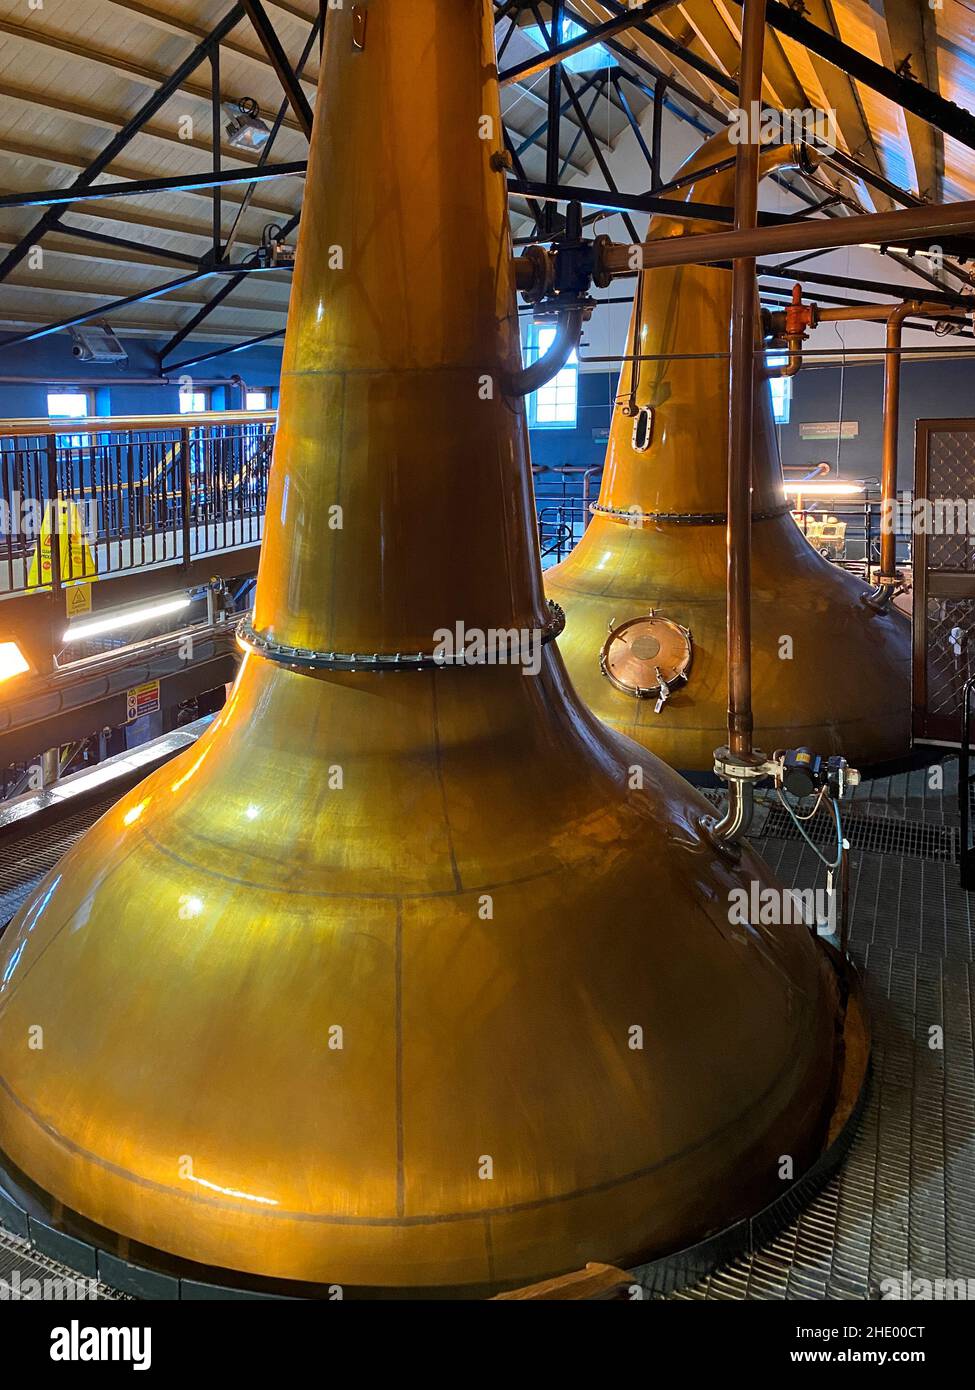 Copper pot stills used in the production of Single Malt Scotch Whisky. Dalwhinnie Whisky Distillery in the Highland village of Dalwhinnie in Scotland. Stock Photo